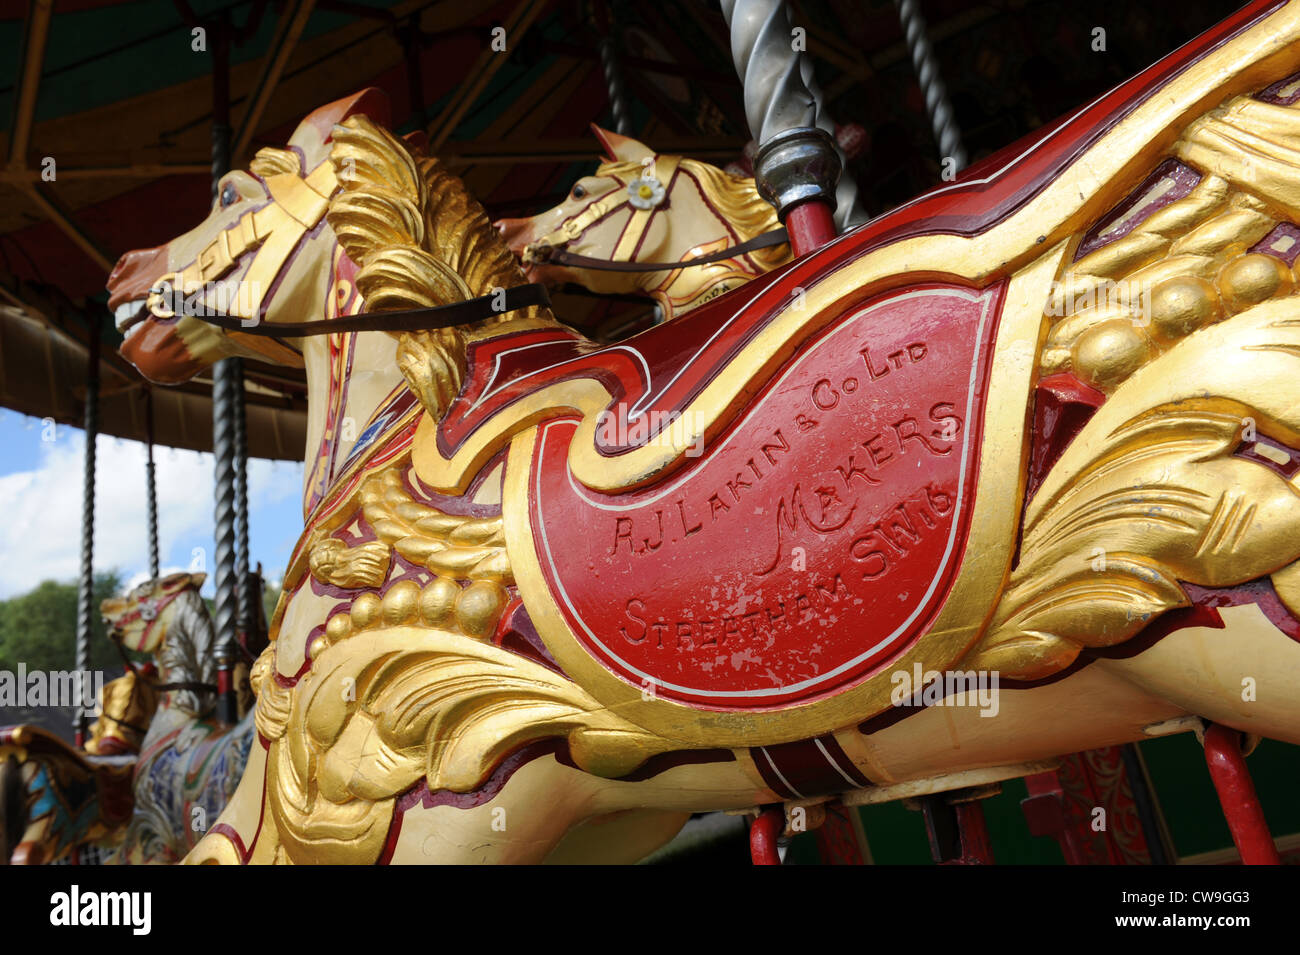 Traditional carousel horse made by R J Lakin & Co in Uk Stock Photo